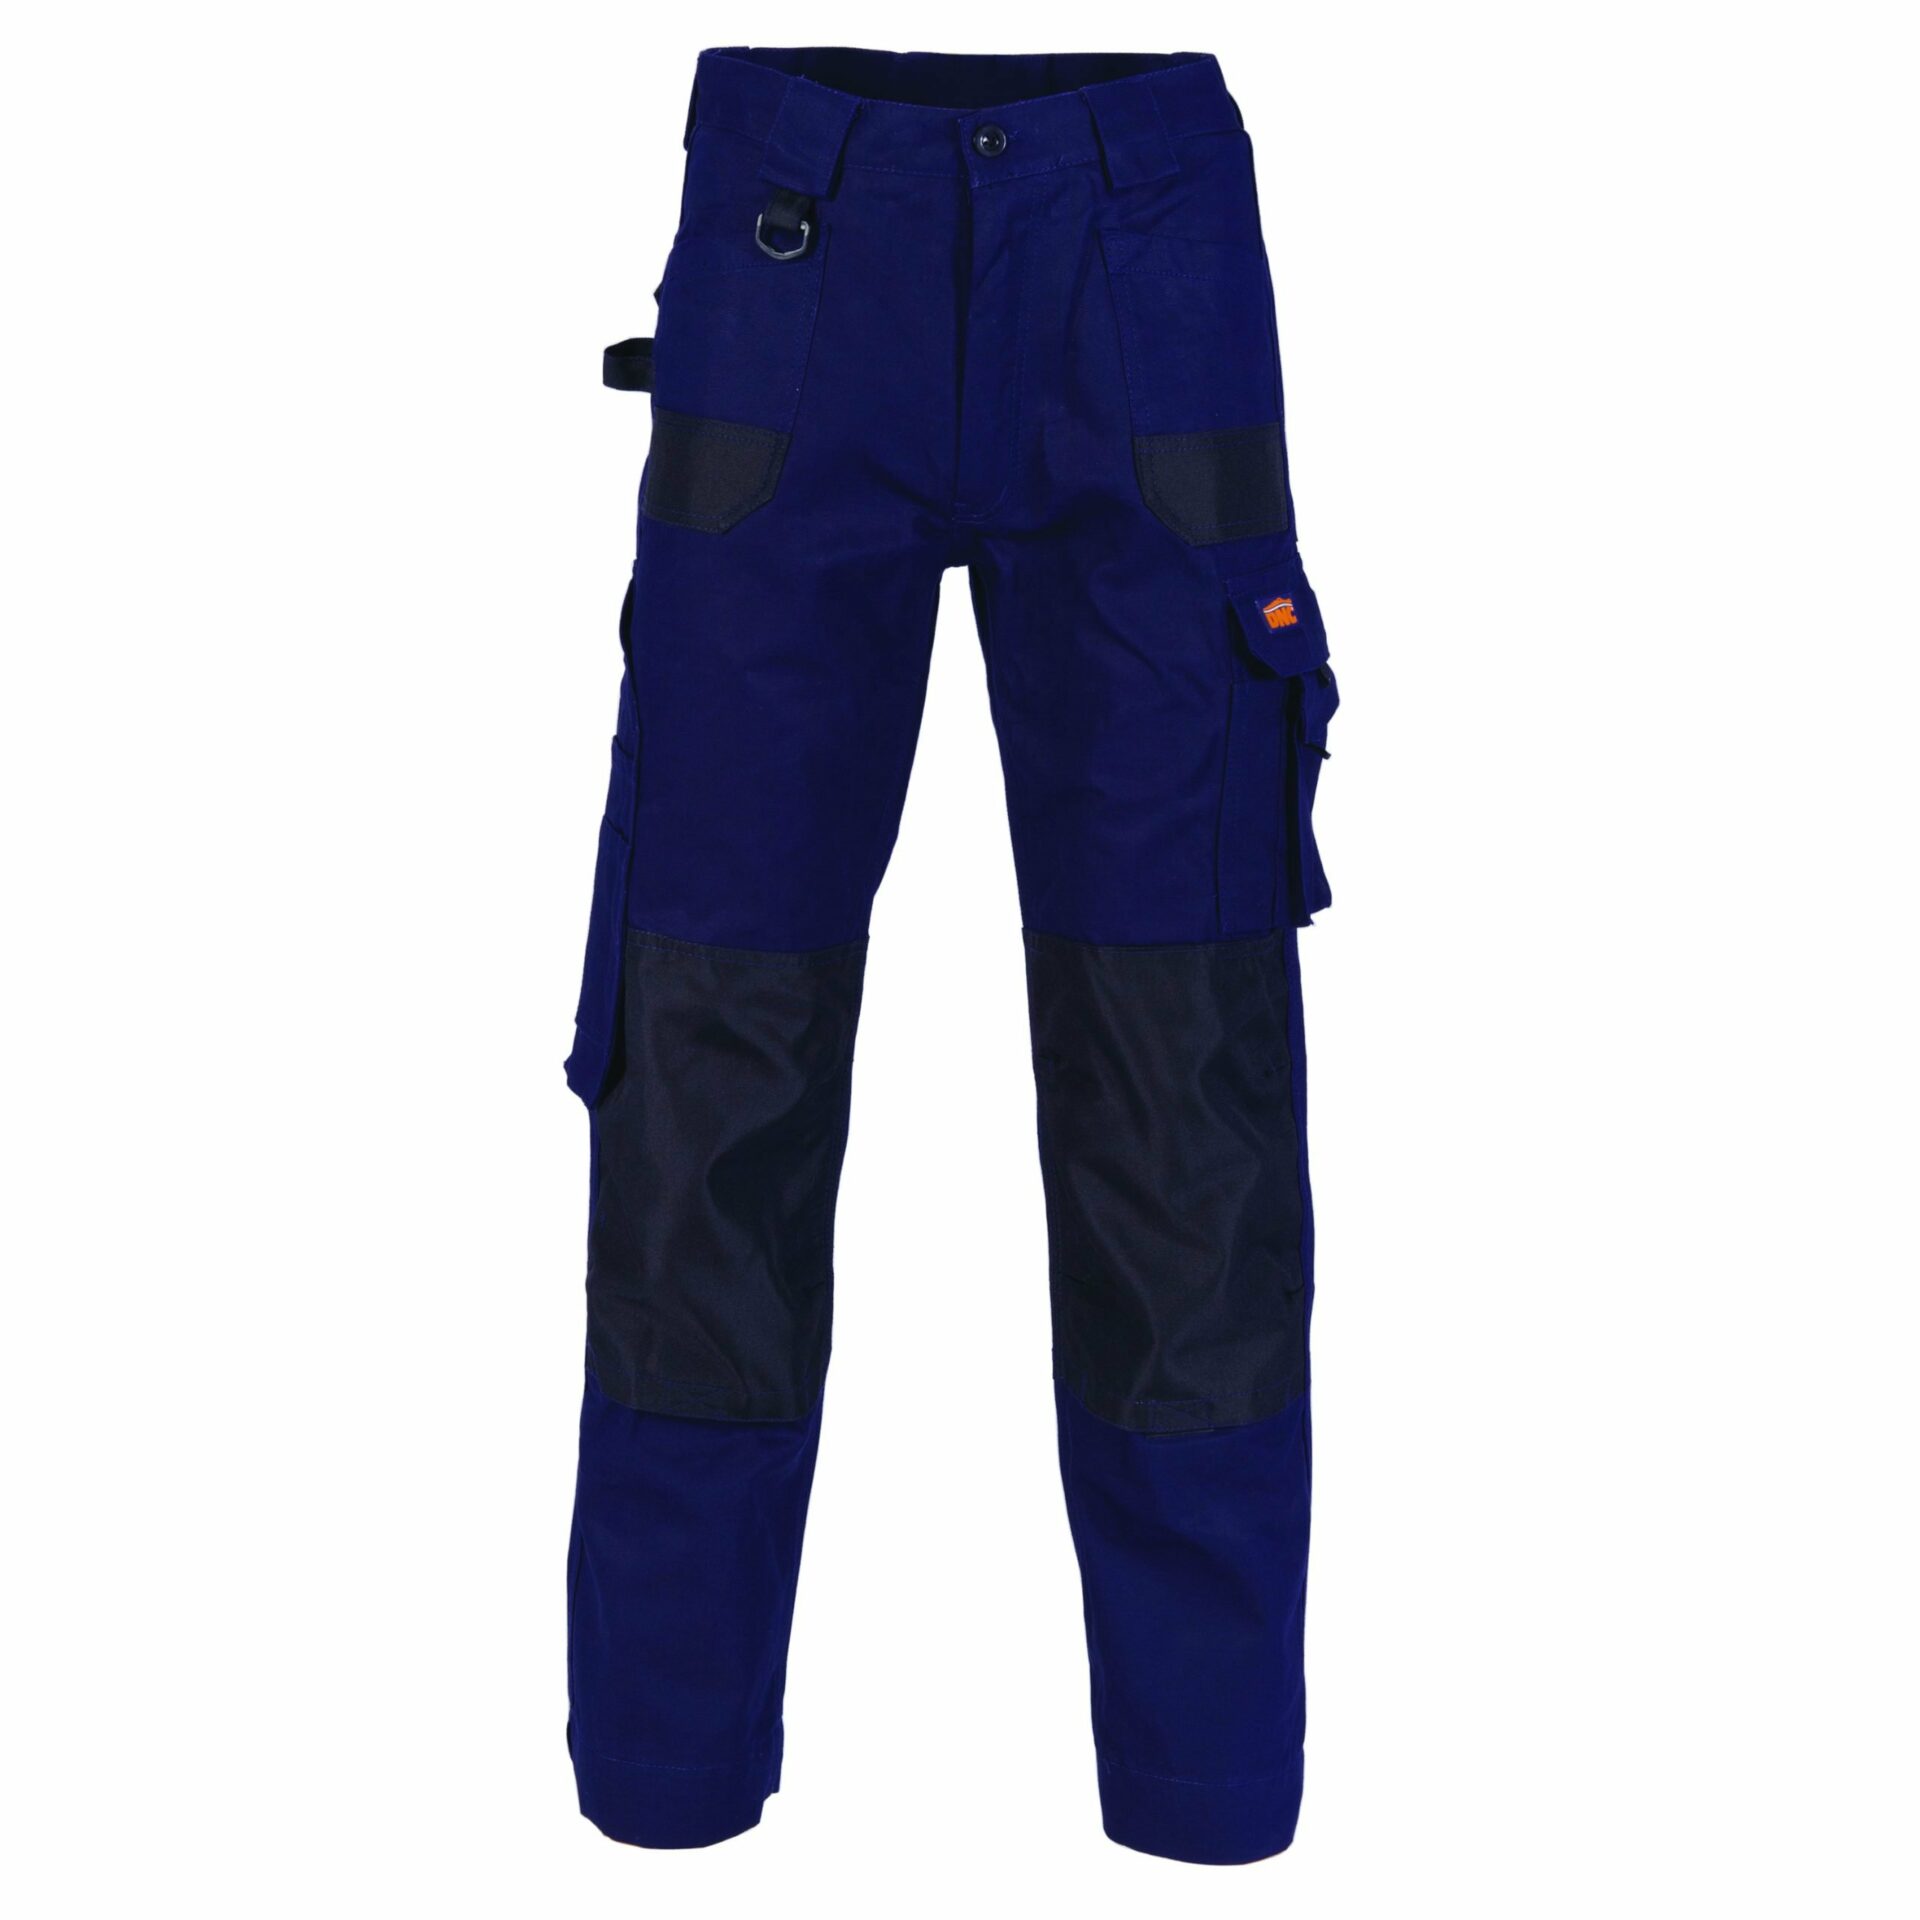 Buy 3335-Duratex Cotton Duck Weave Cargo Pants at Best Price - AJ Safety